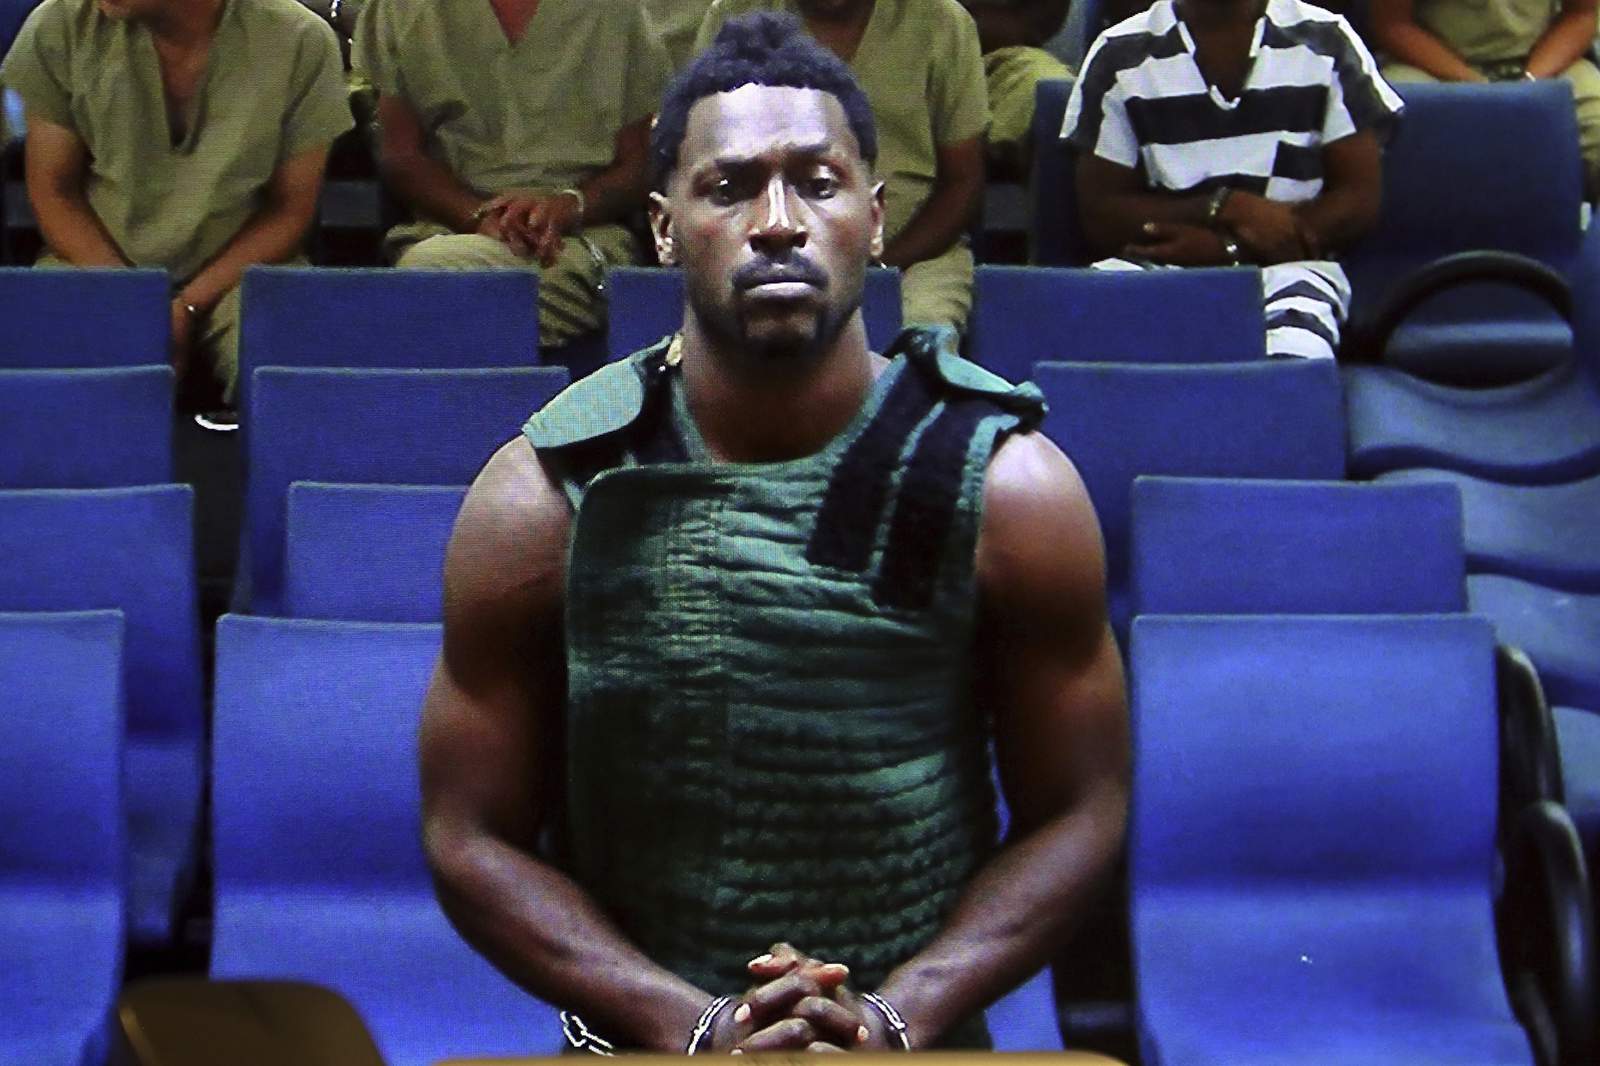 NFL star Antonio Brown gets probation for fight with driver